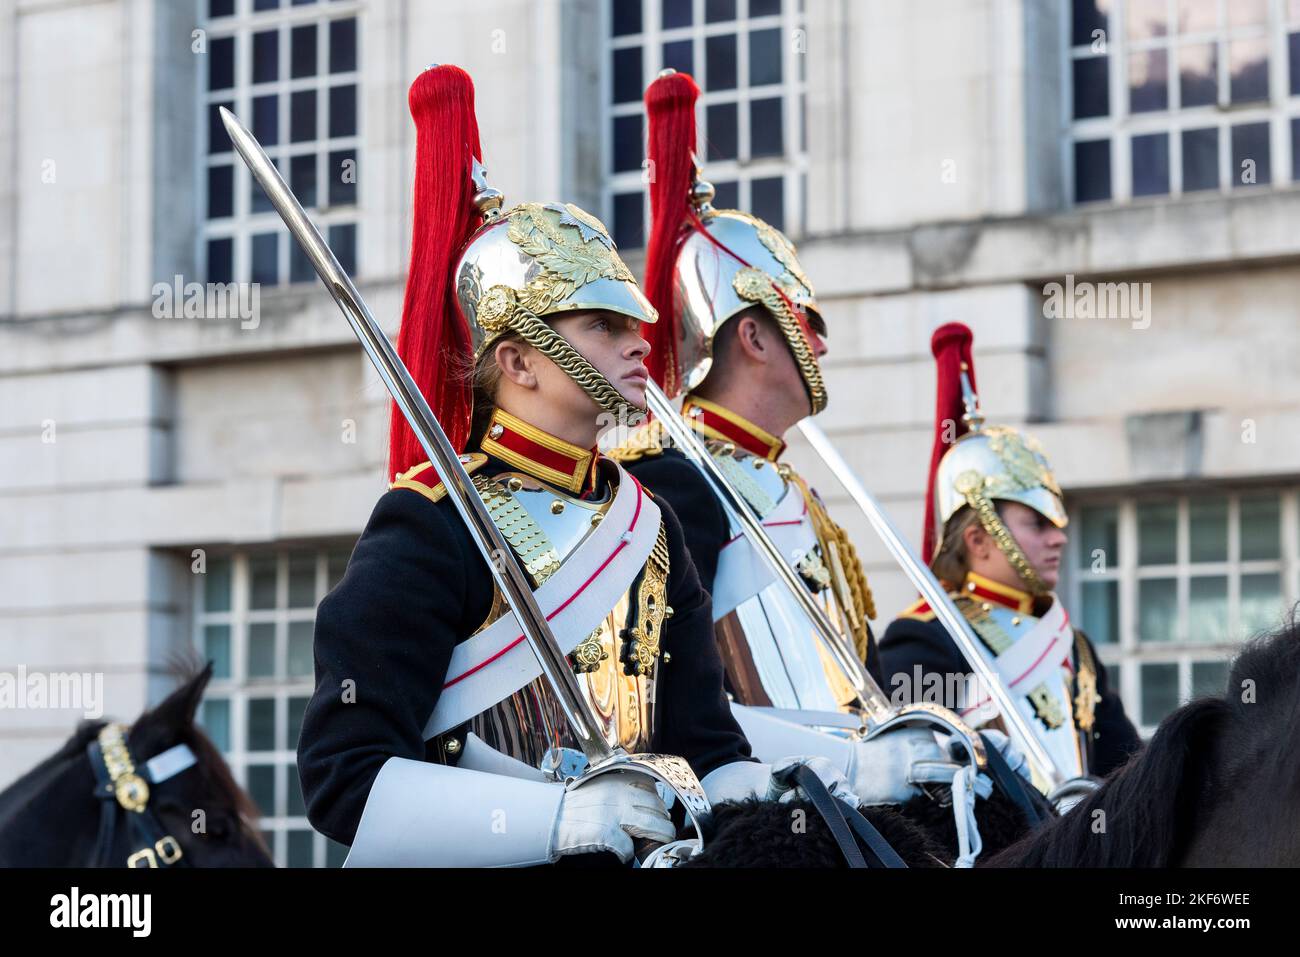 The Blues and Royals of the The Household Cavalry at the Lord Mayor's Show parade in the City of London, UK. Female soldier riding Stock Photo